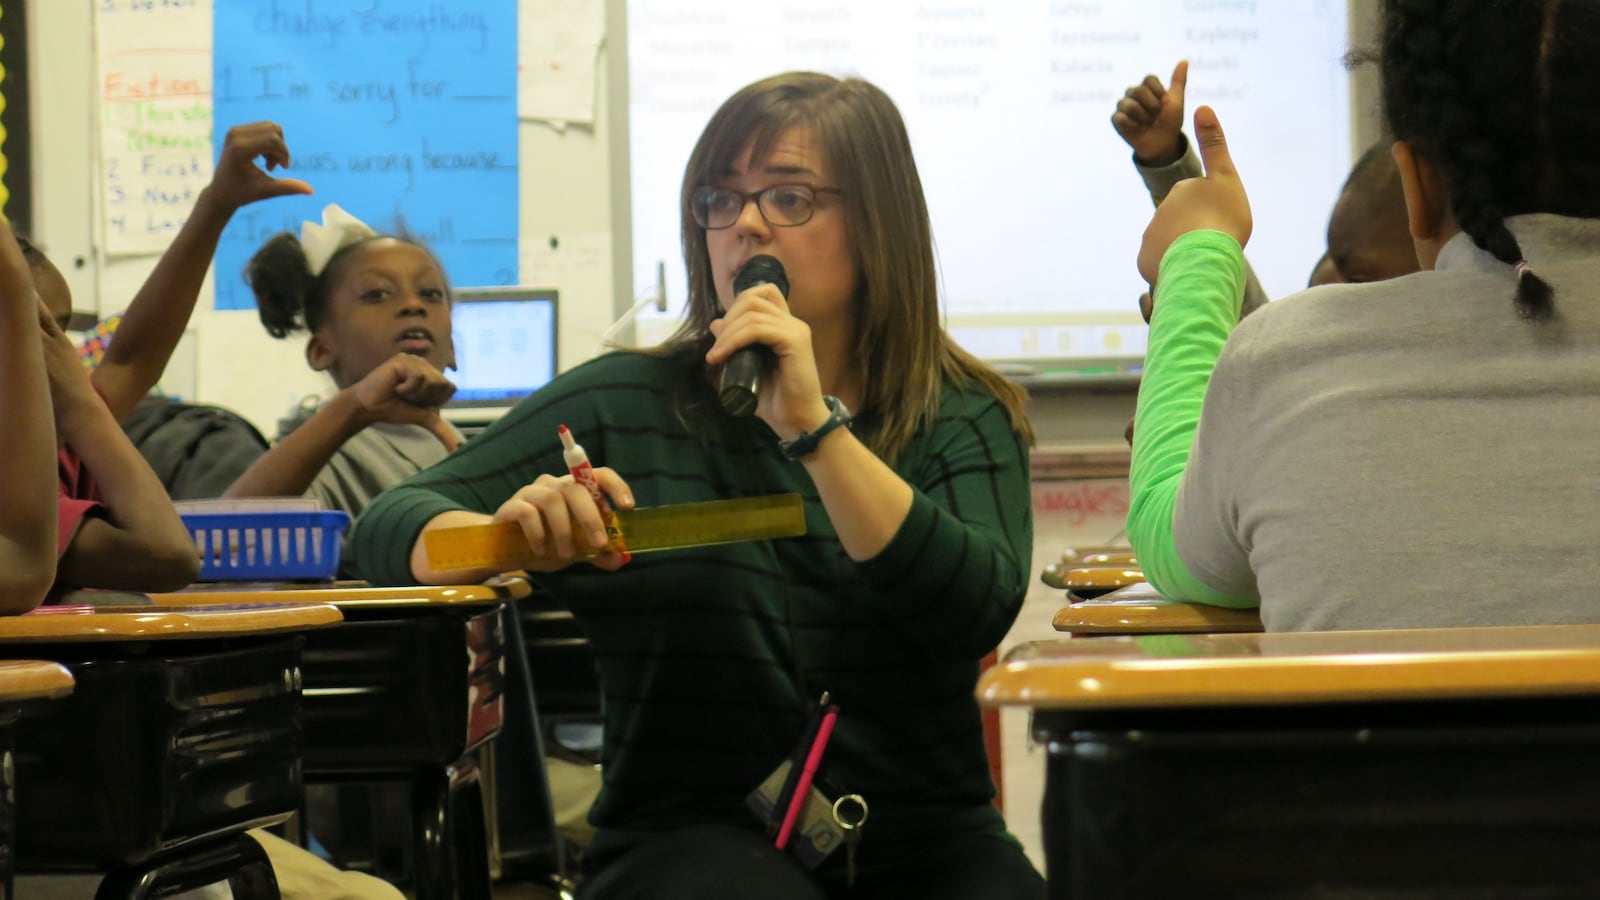 Second-grade teacher Katelyn Woodard uses a wireless microphone and amplifier to project her voice during class on Jan. 13, 2015, at Cornerstone Preparatory School in Memphis.